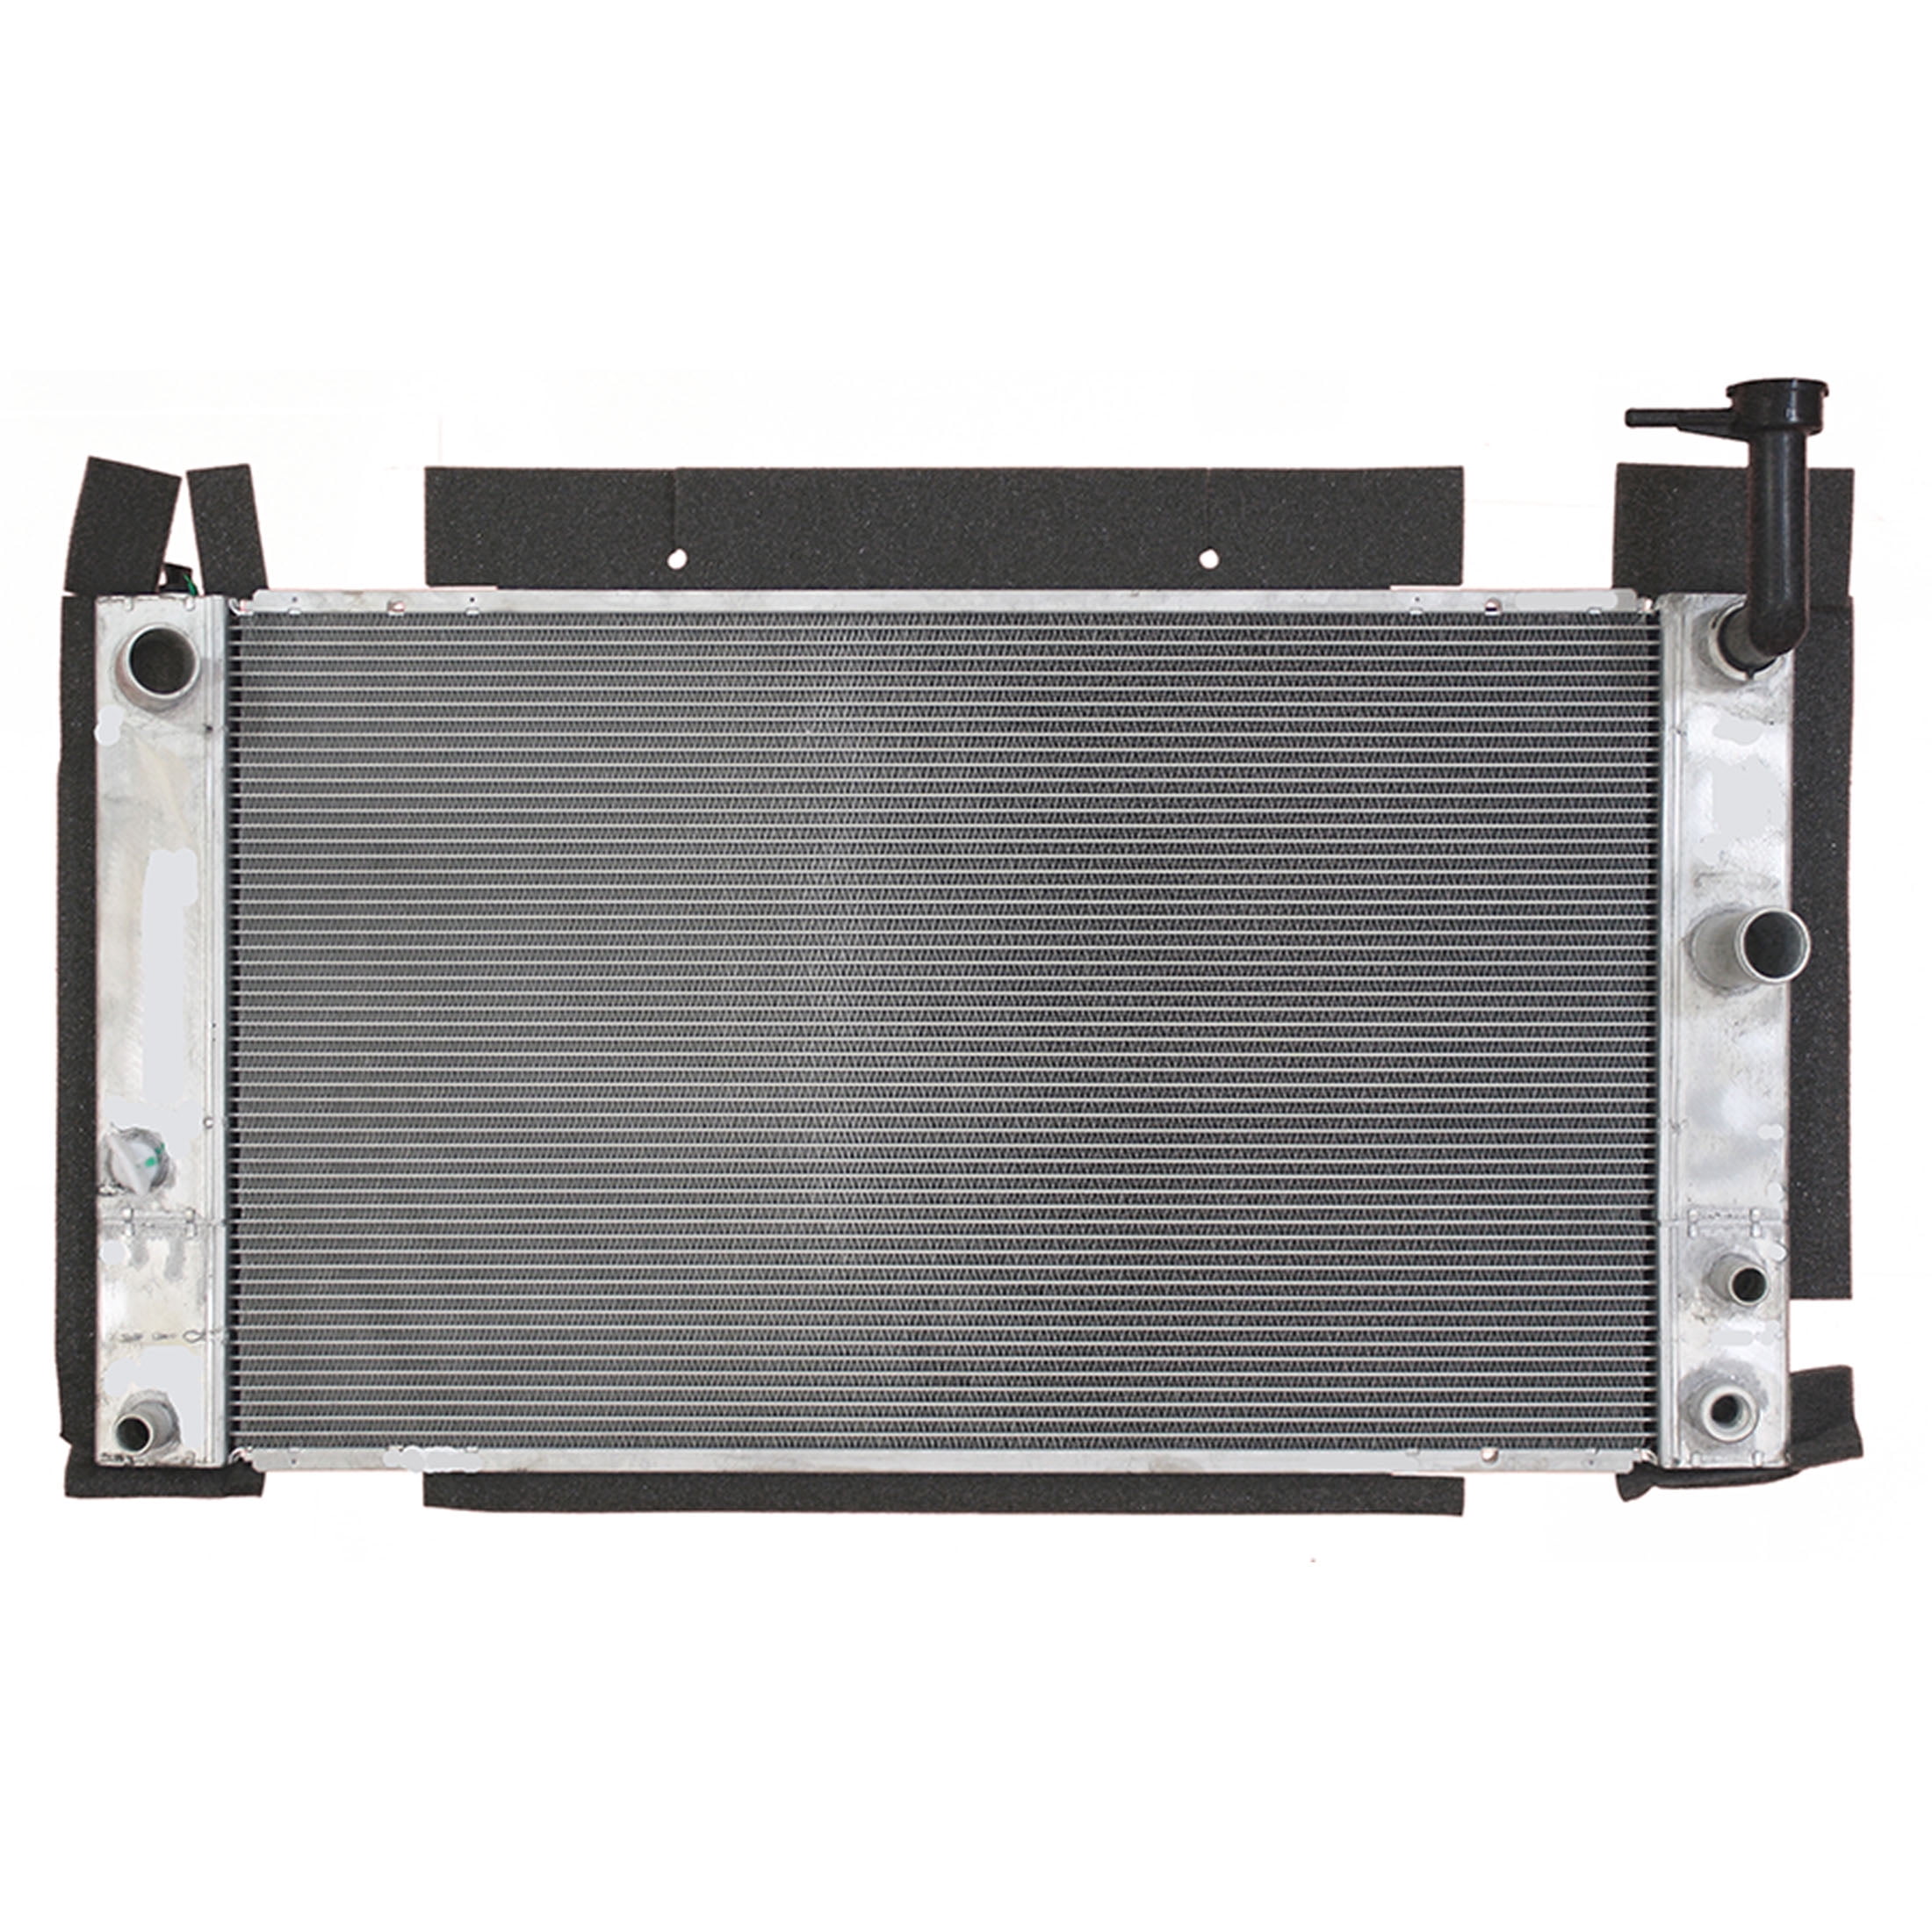 Agility Auto Parts 8011407 Radiator for Toyota Specific Models 